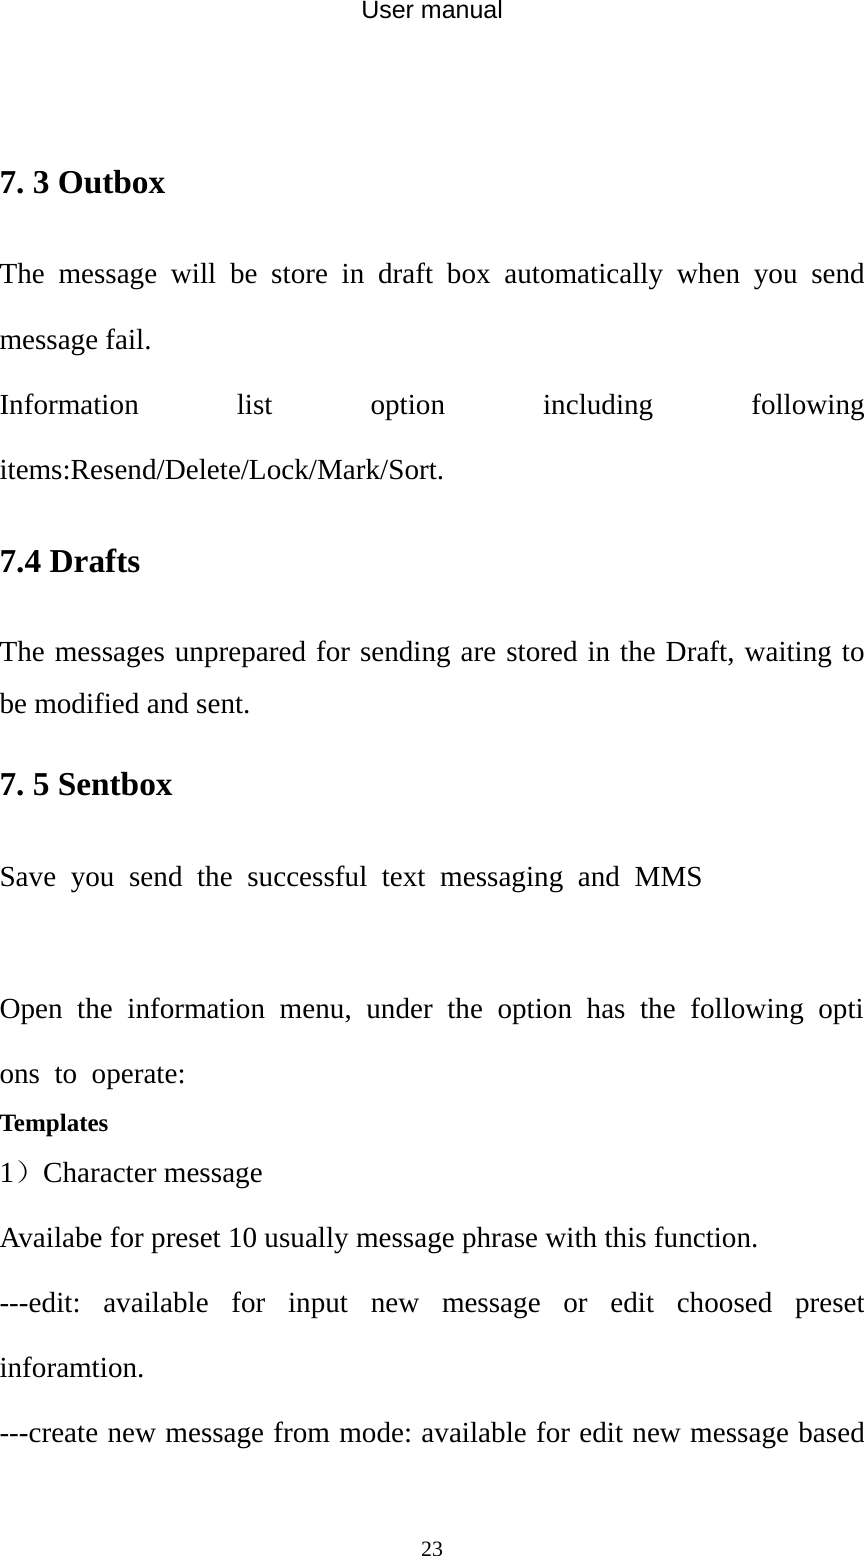 User manual  23 7. 3 Outbox The message will be store in draft box automatically when you send message fail. Information list option including following items:Resend/Delete/Lock/Mark/Sort. 7.4 Drafts The messages unprepared for sending are stored in the Draft, waiting to be modified and sent. 7. 5 Sentbox Save you send the successful text messaging and MMS  Open the information menu, under the option has the following options to operate: Templates   1）Character message Availabe for preset 10 usually message phrase with this function. ---edit: available for input new message or edit choosed preset inforamtion. ---create new message from mode: available for edit new message based 